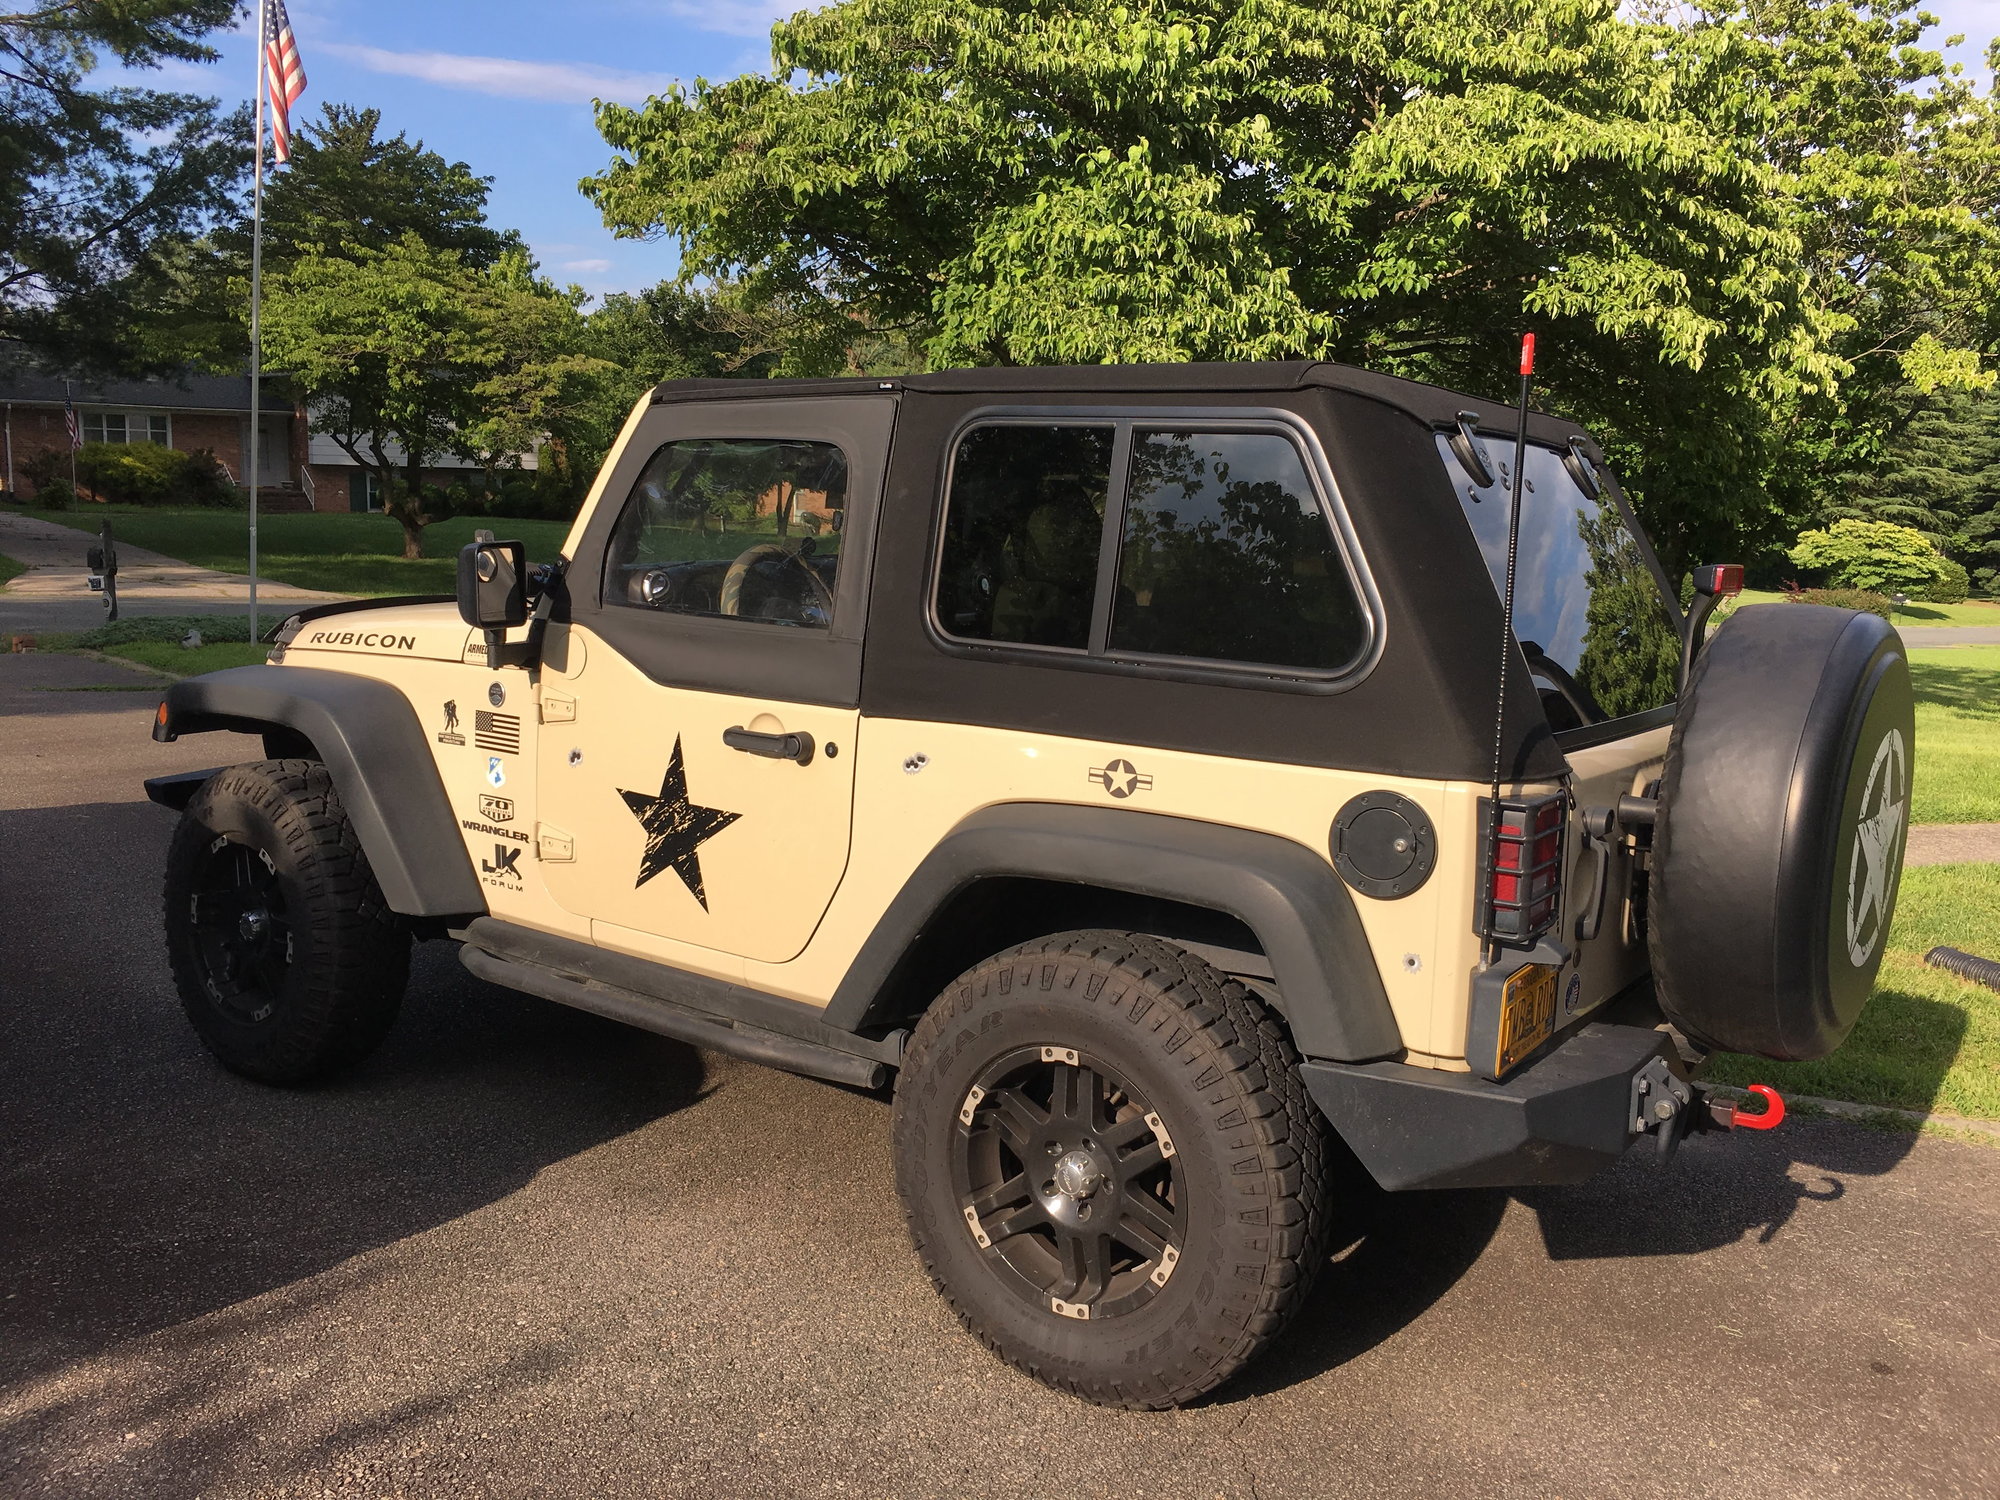 Bestop Trektop Pro - Parts Only - Sunrider & Rear Window - FREE, FREE, FREE   - The top destination for Jeep JK and JL Wrangler news,  rumors, and discussion